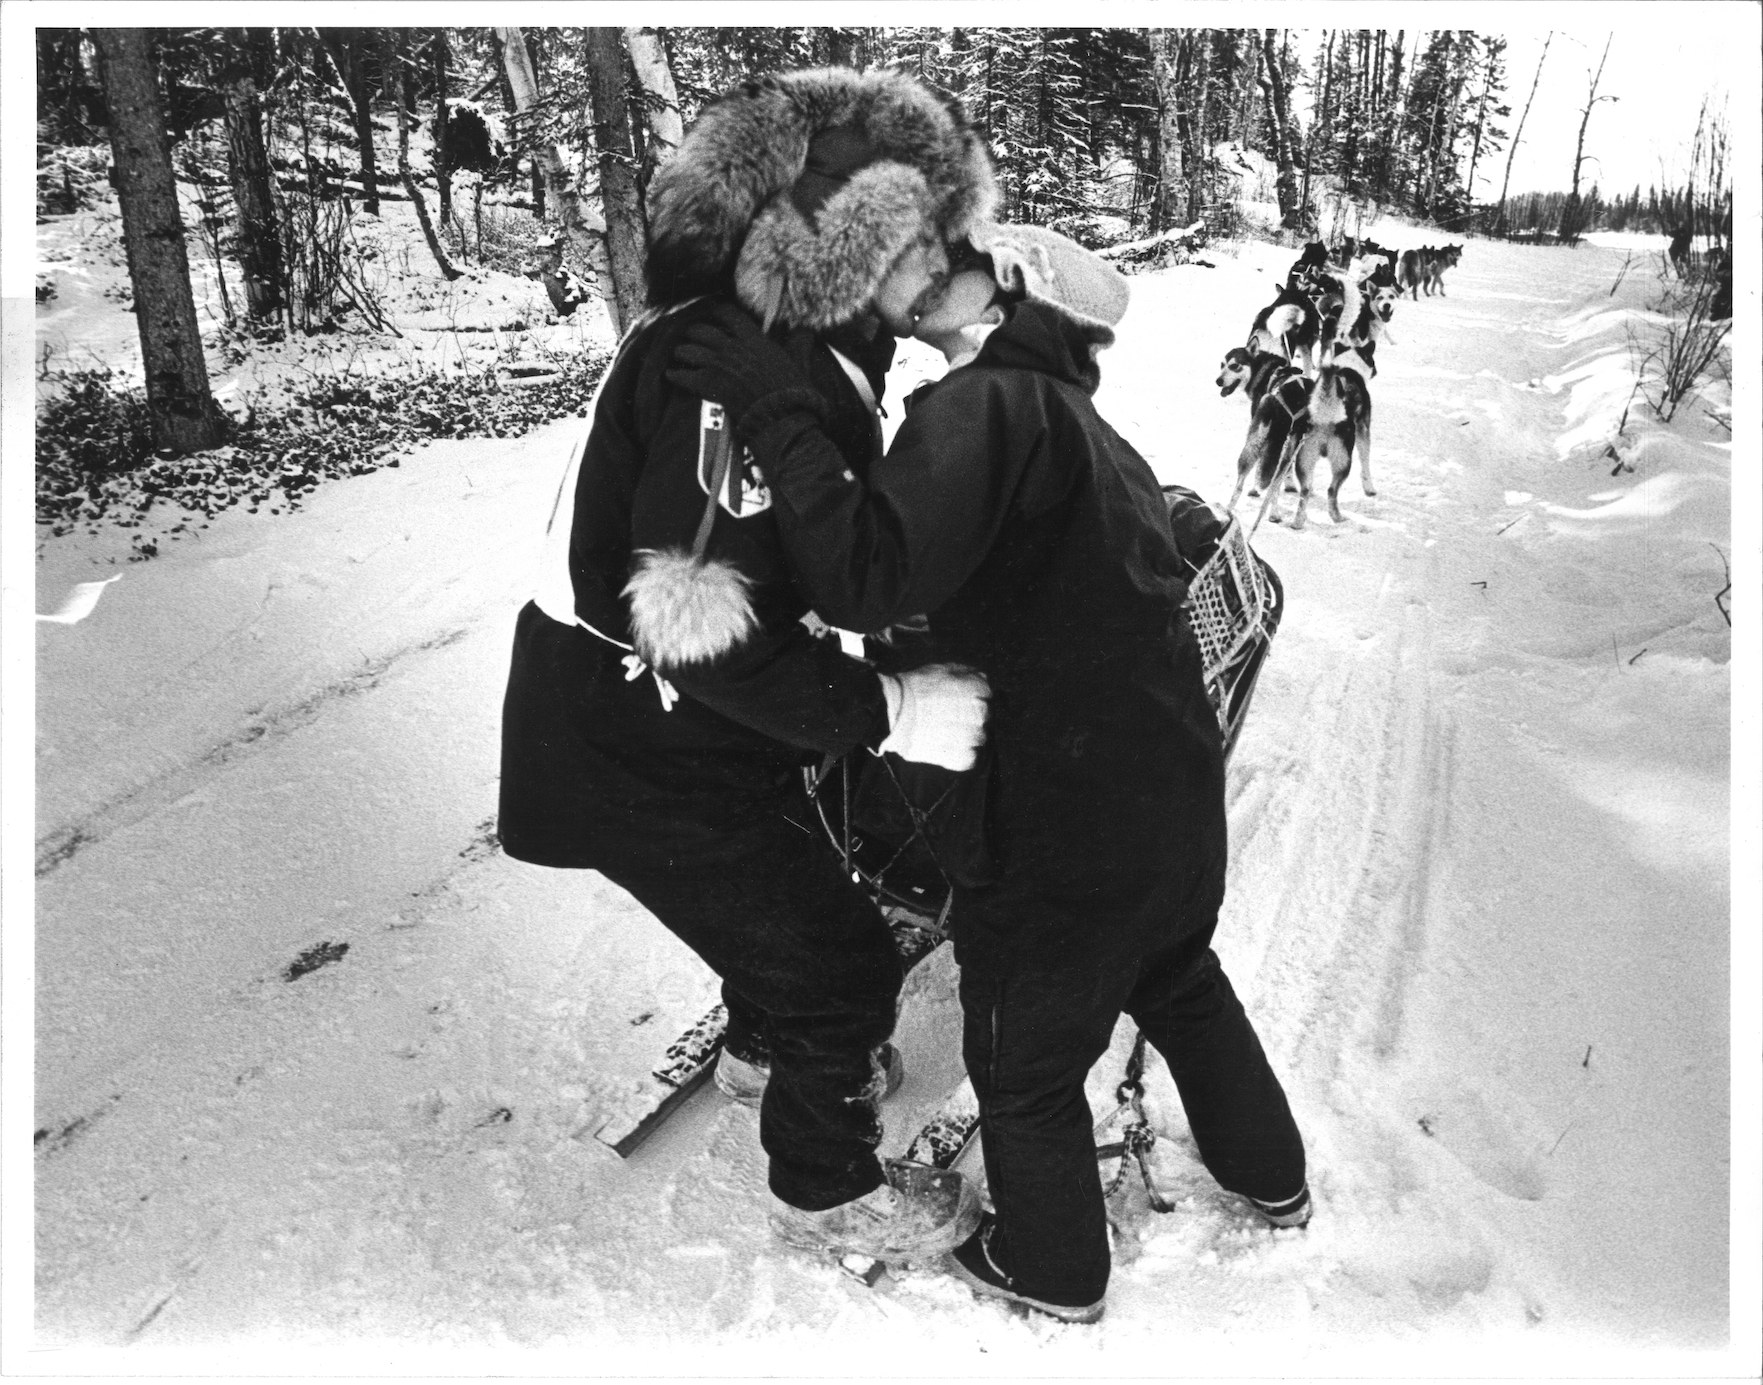 Musher stands on sled, dogs ready to run, and kisses his wife who is standing next to him on the snowy trail. Black and white photo.